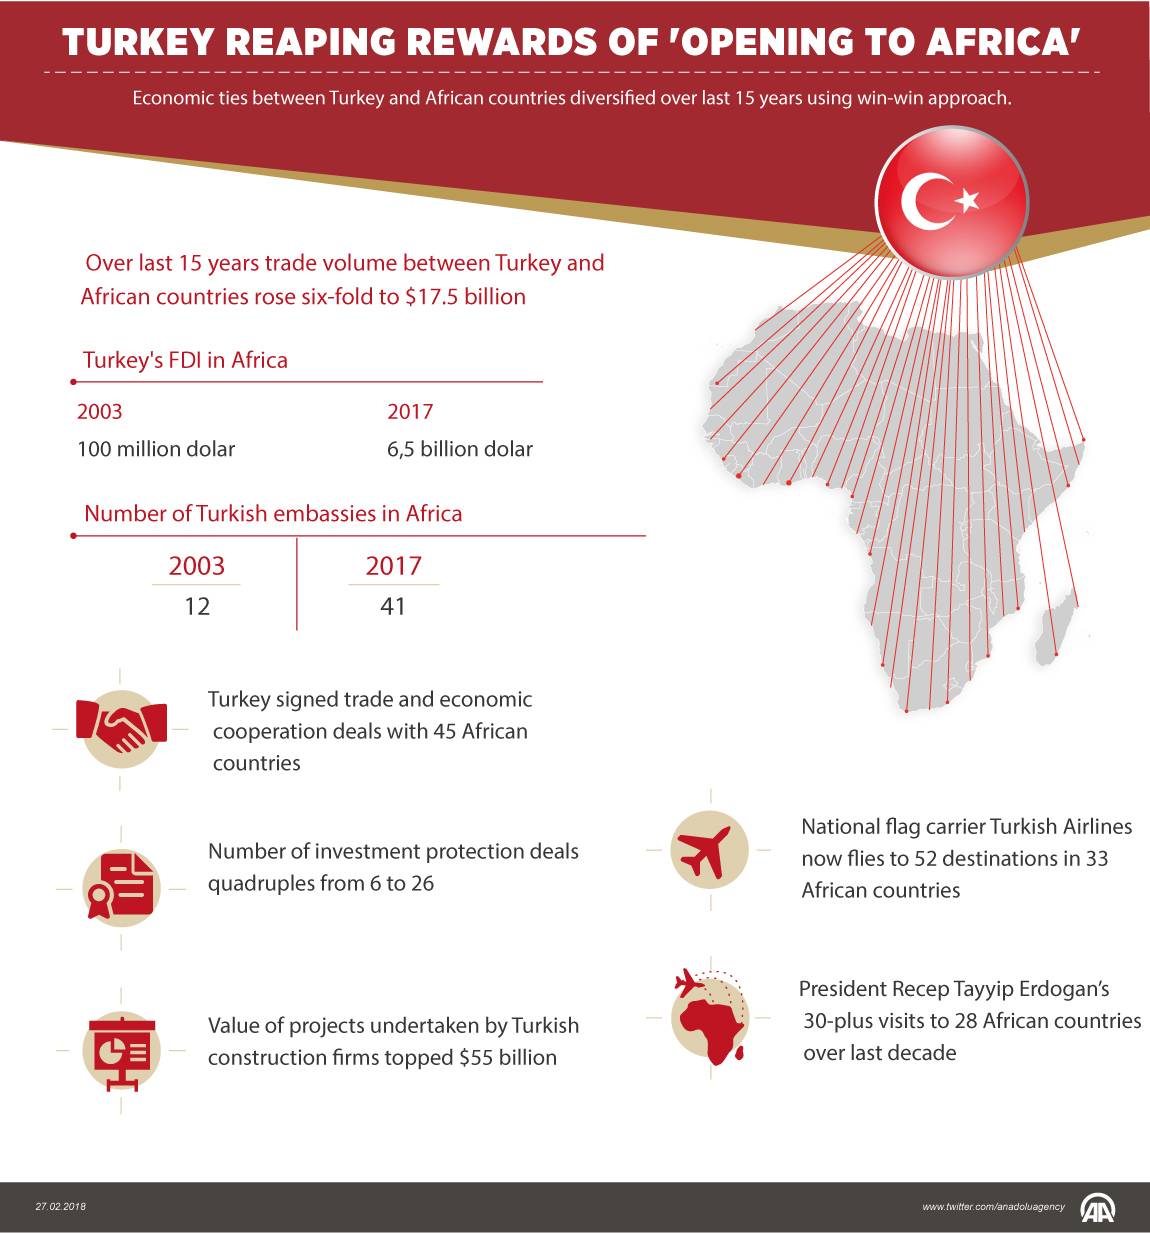 Turkey reaping rewards of 'Opening to Africa'